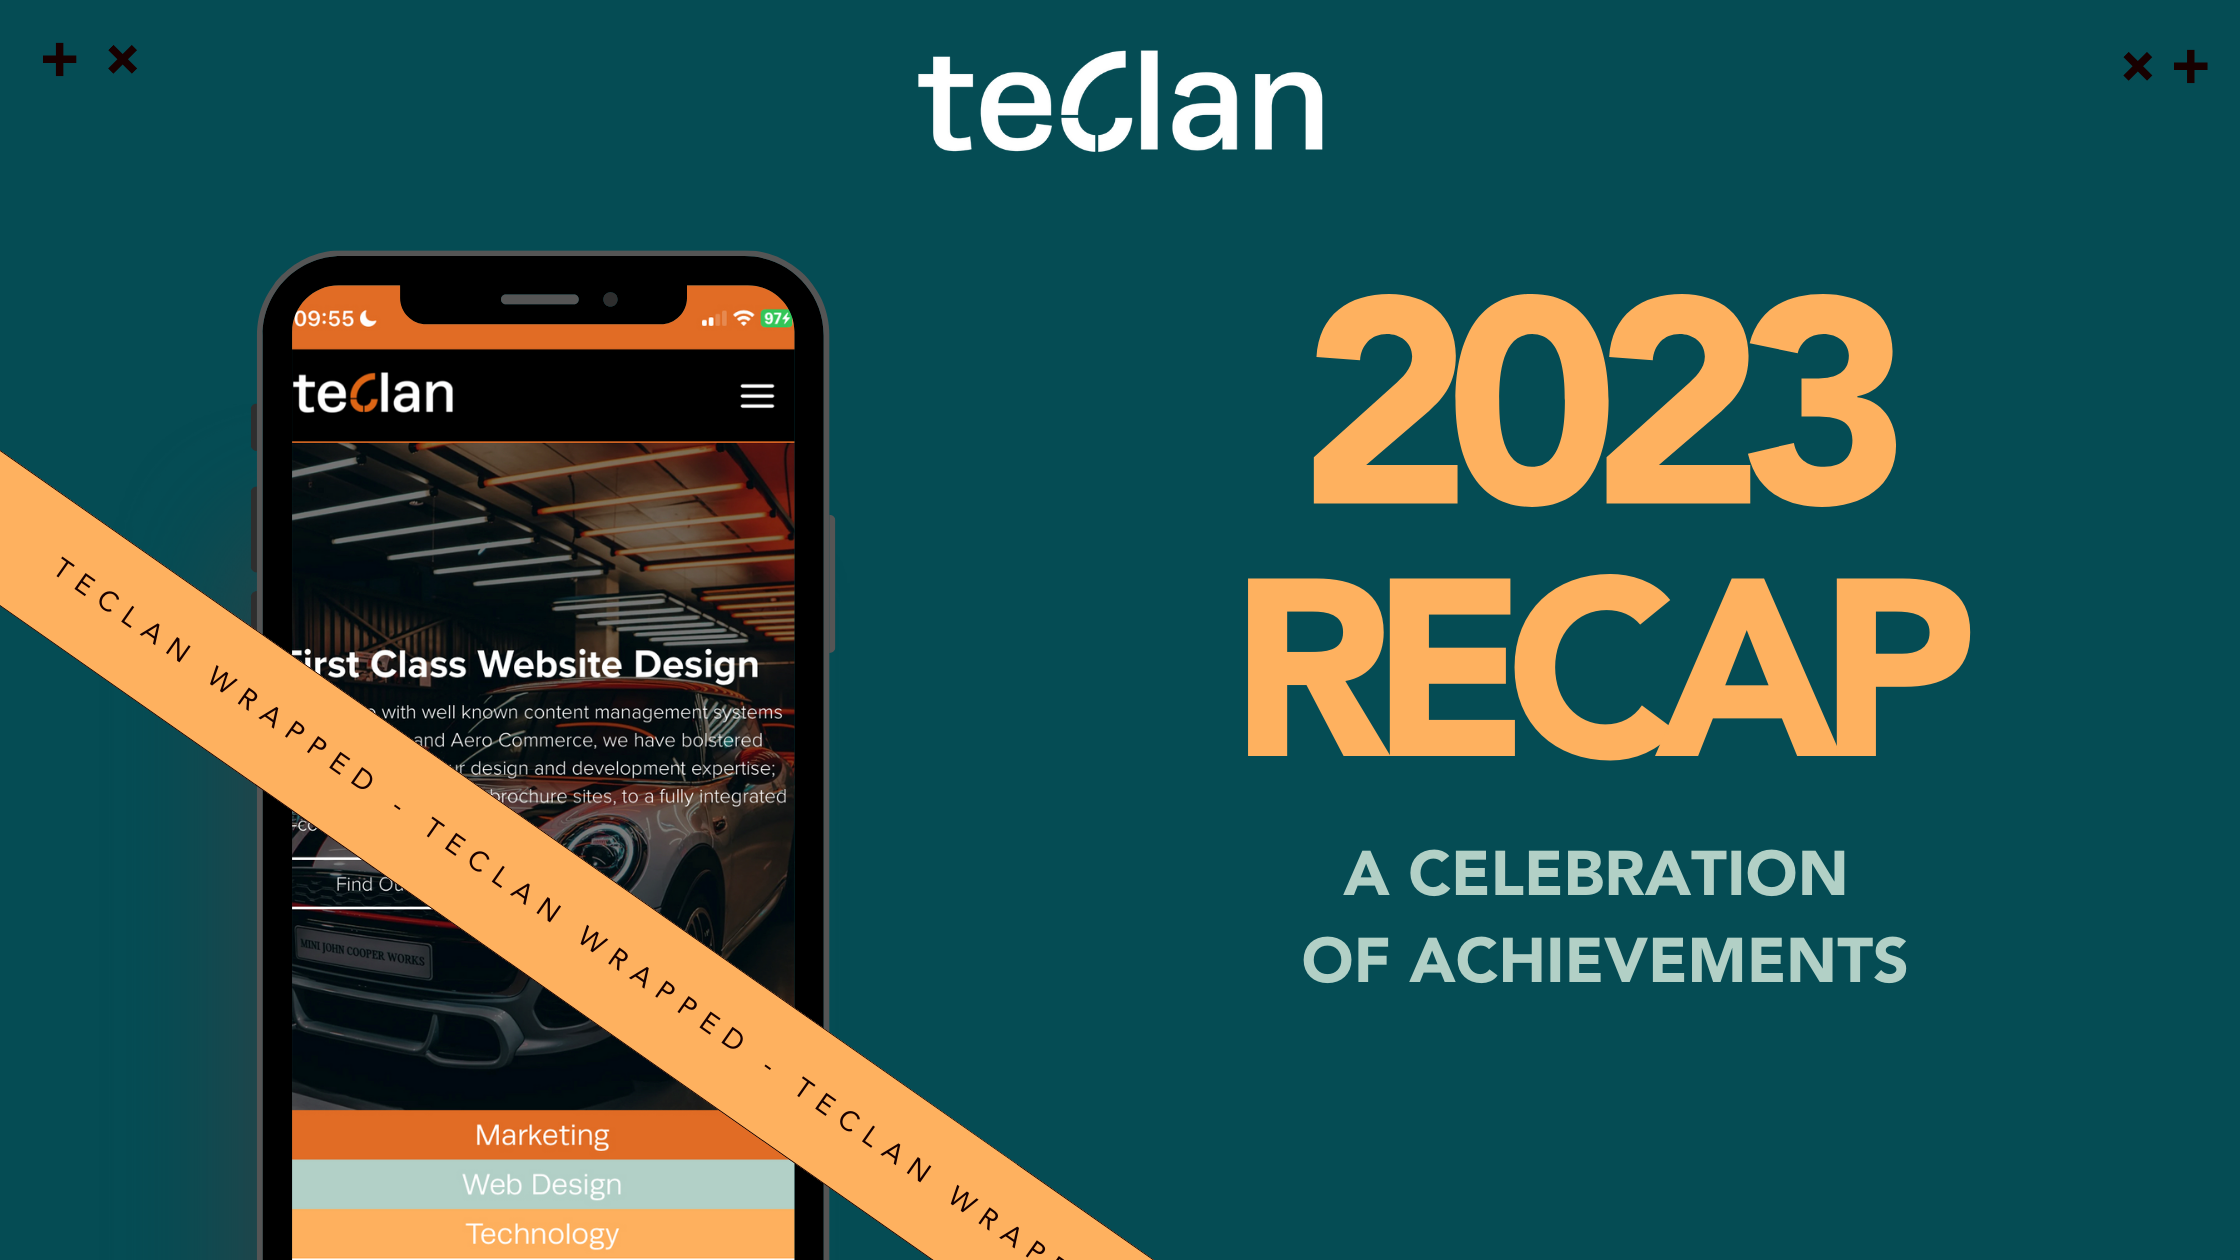 The blog banner has an Image of an iPhone with the teclan website on it, with a banner going across it saying ‘teclan wrapped’. The banner also has the text ‘2023 Recap: A Celebration of Achievements”